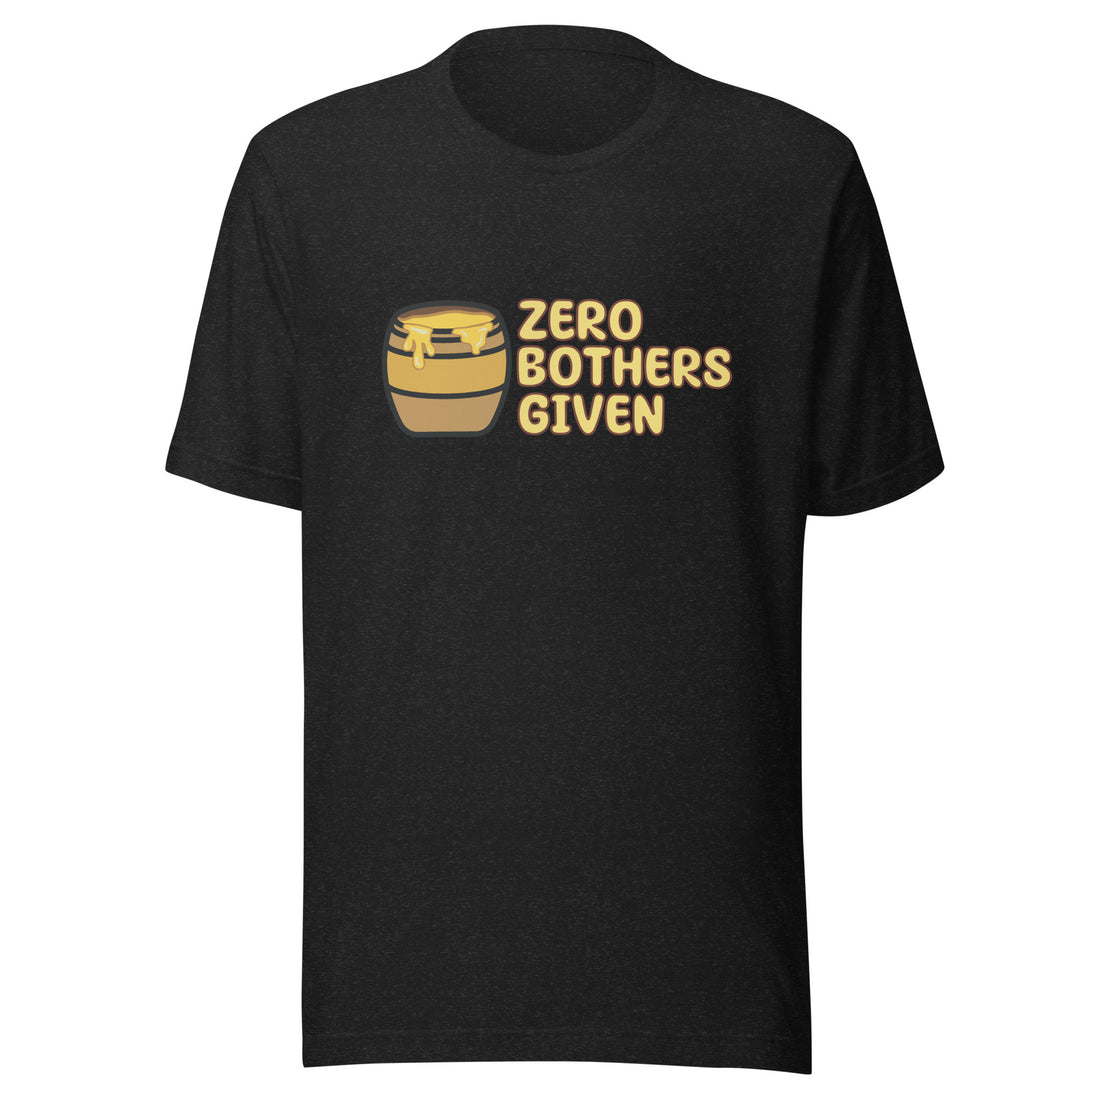 0 Bothers Given Tee